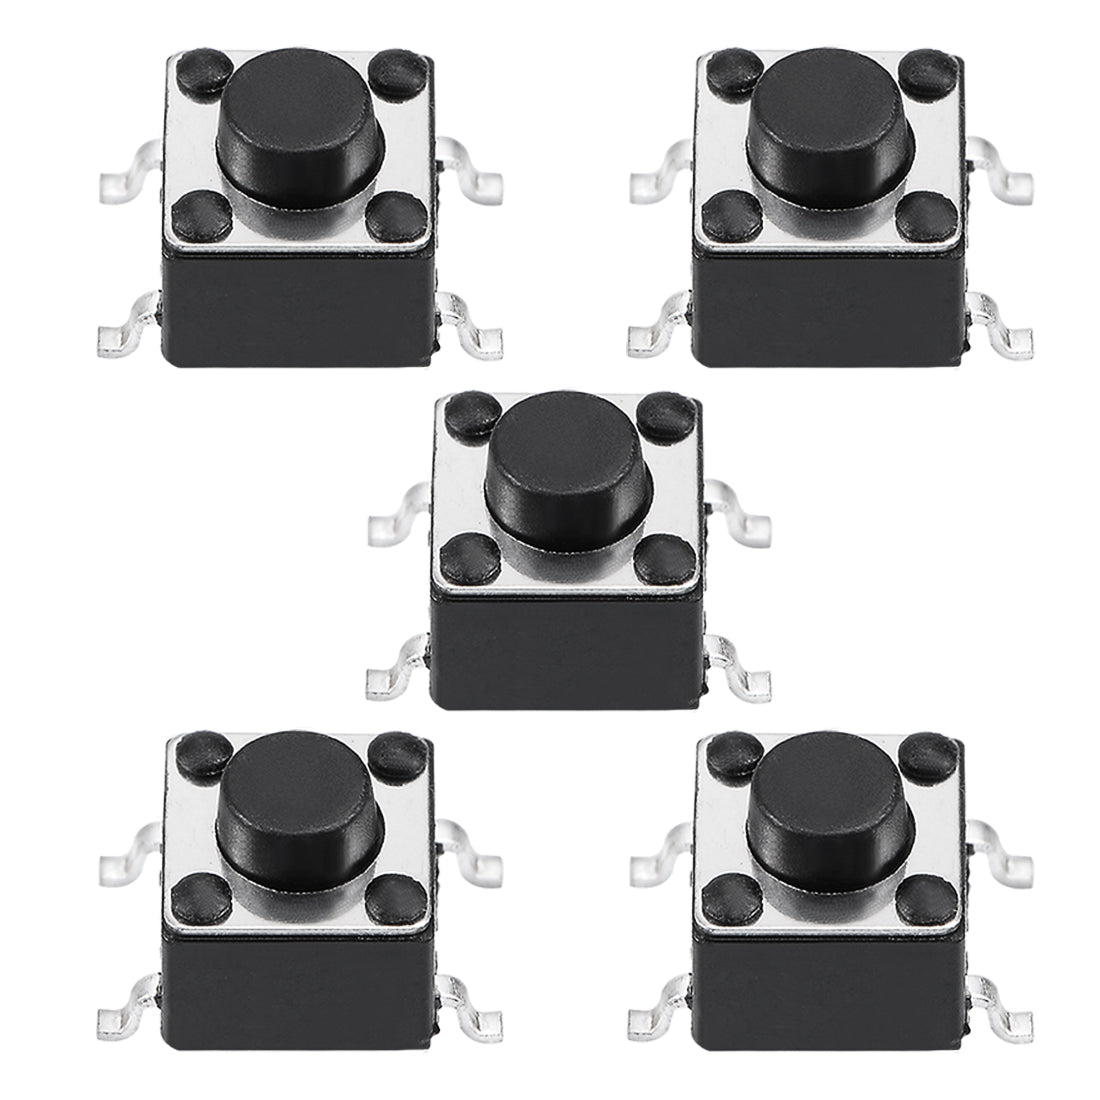 uxcell Uxcell 6x6x5mm Momentary Panel PCB Surface Mounted Devices SMT Mount 4 Pins Push Button SPST Tactile Tact Switch 5PCS